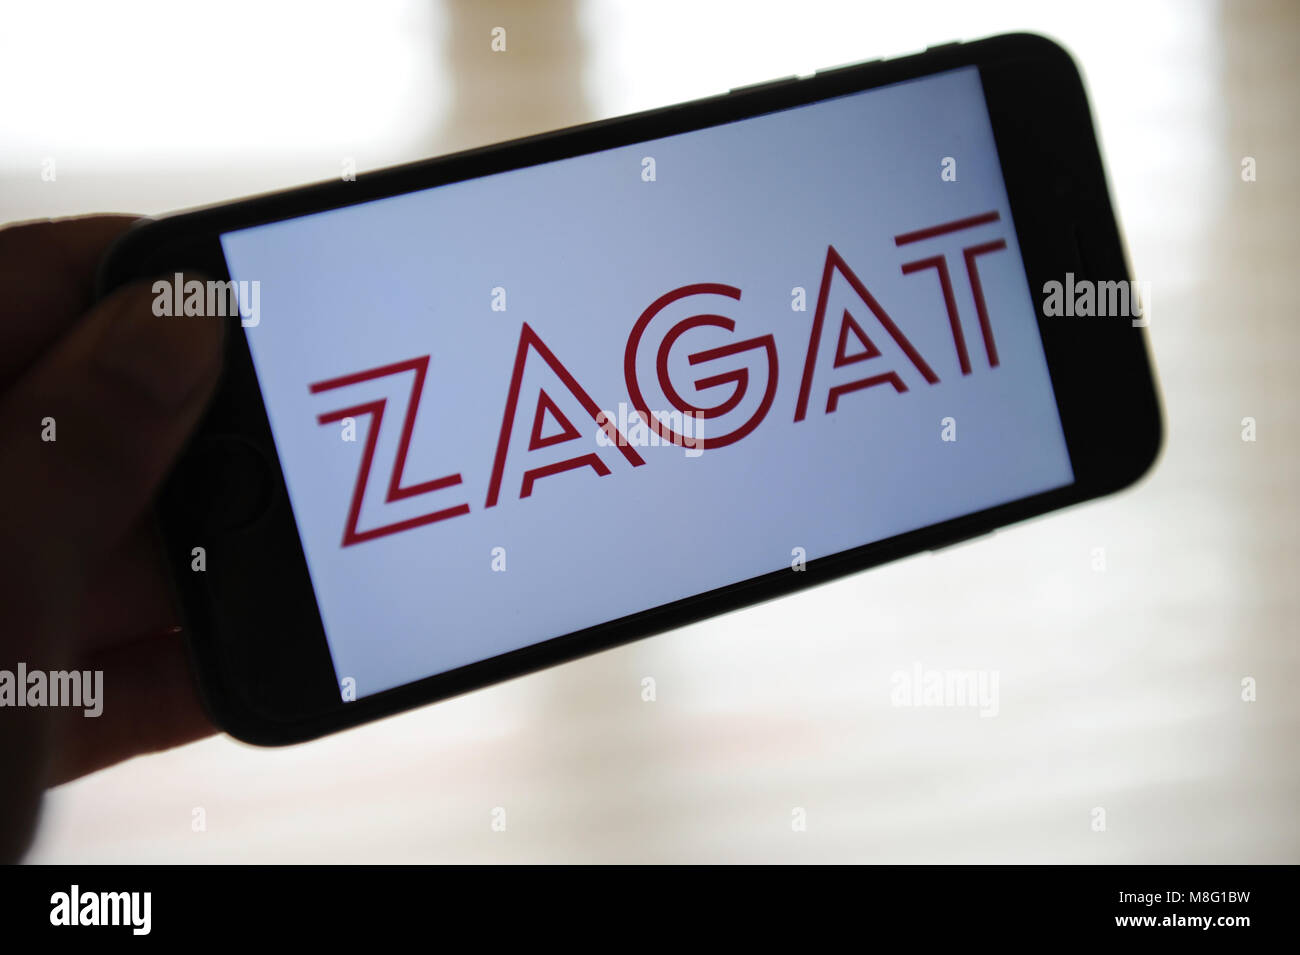 Zagat the food guide website Stock Photo